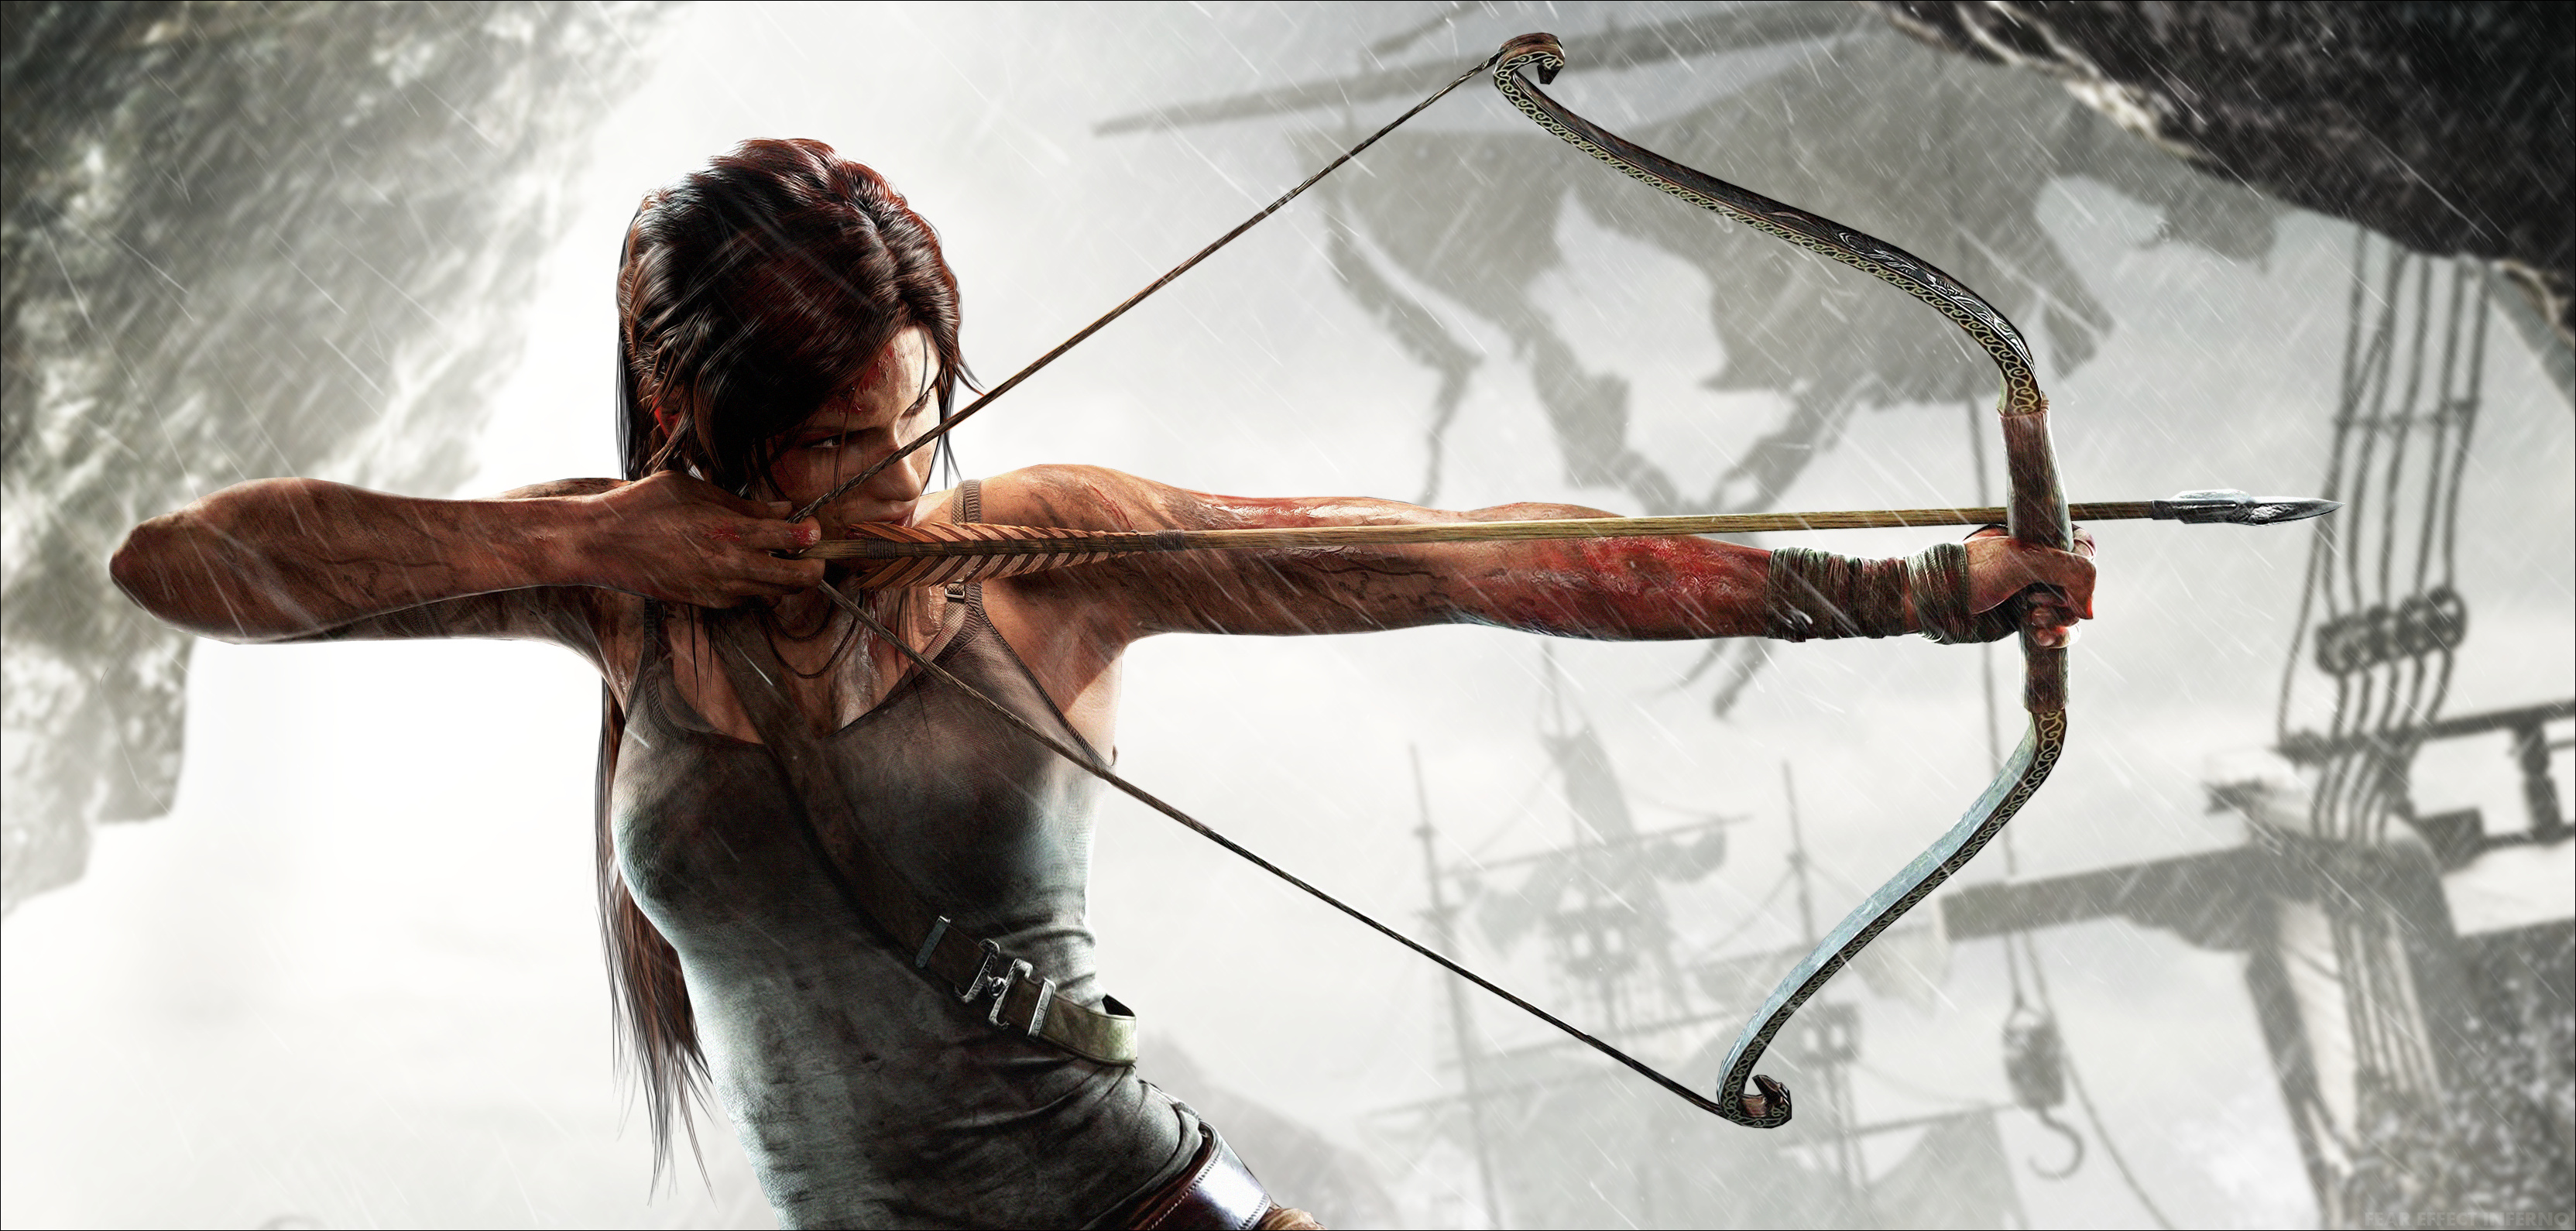 520 Lara Croft wallpapers, Collectible wallpapers, Iconic gaming moments, 3330x1590 Dual Screen Desktop